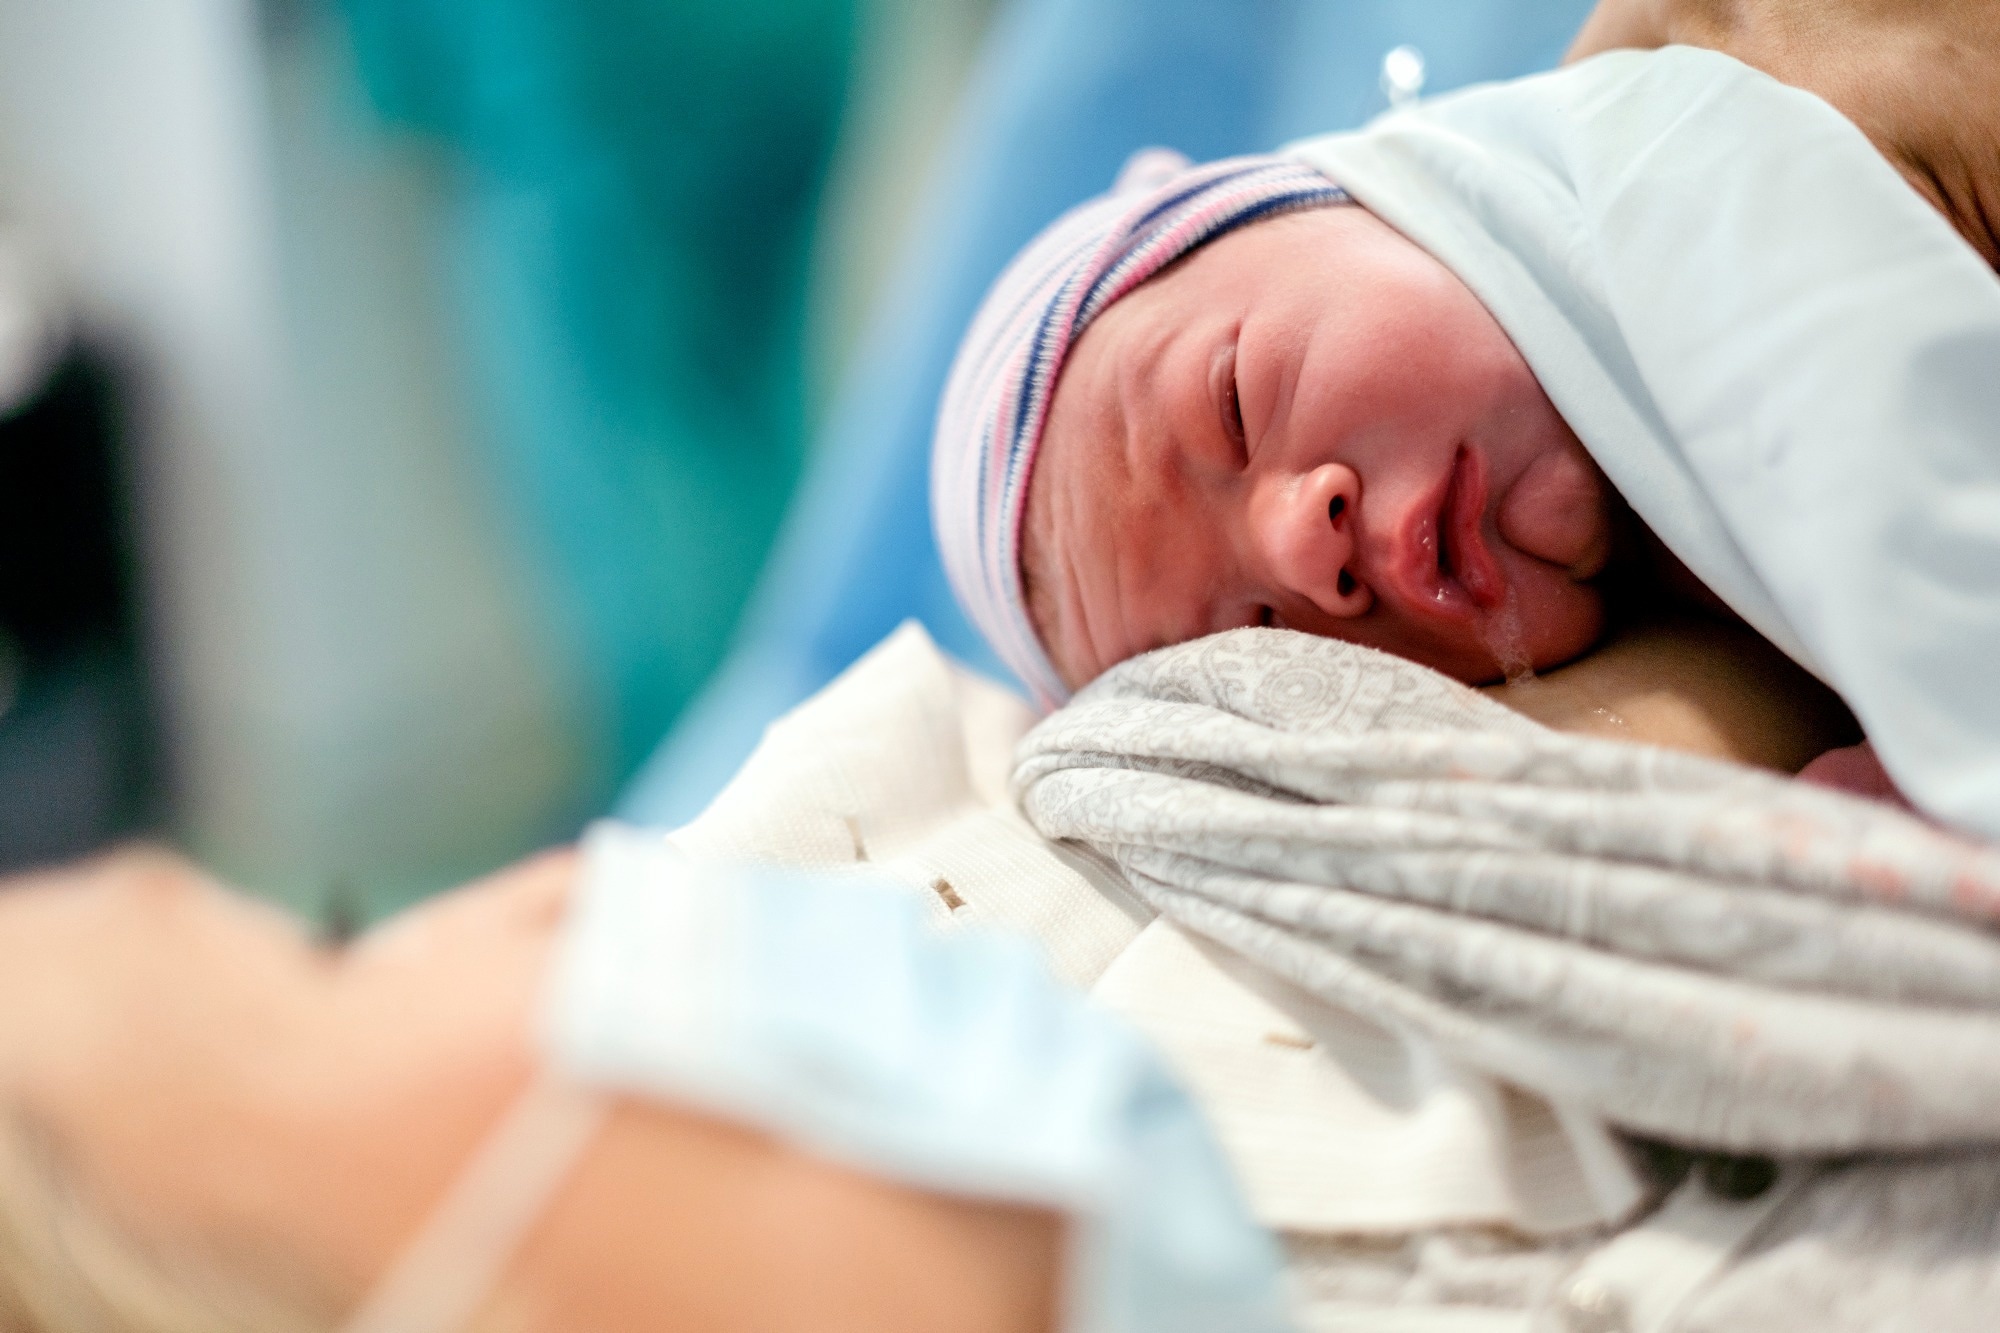 Study: Incidence Rates of Medically Attended COVID-19 in Infants Less than 6 Months of Age. Image Credit: Sopotnicki / Shutterstock